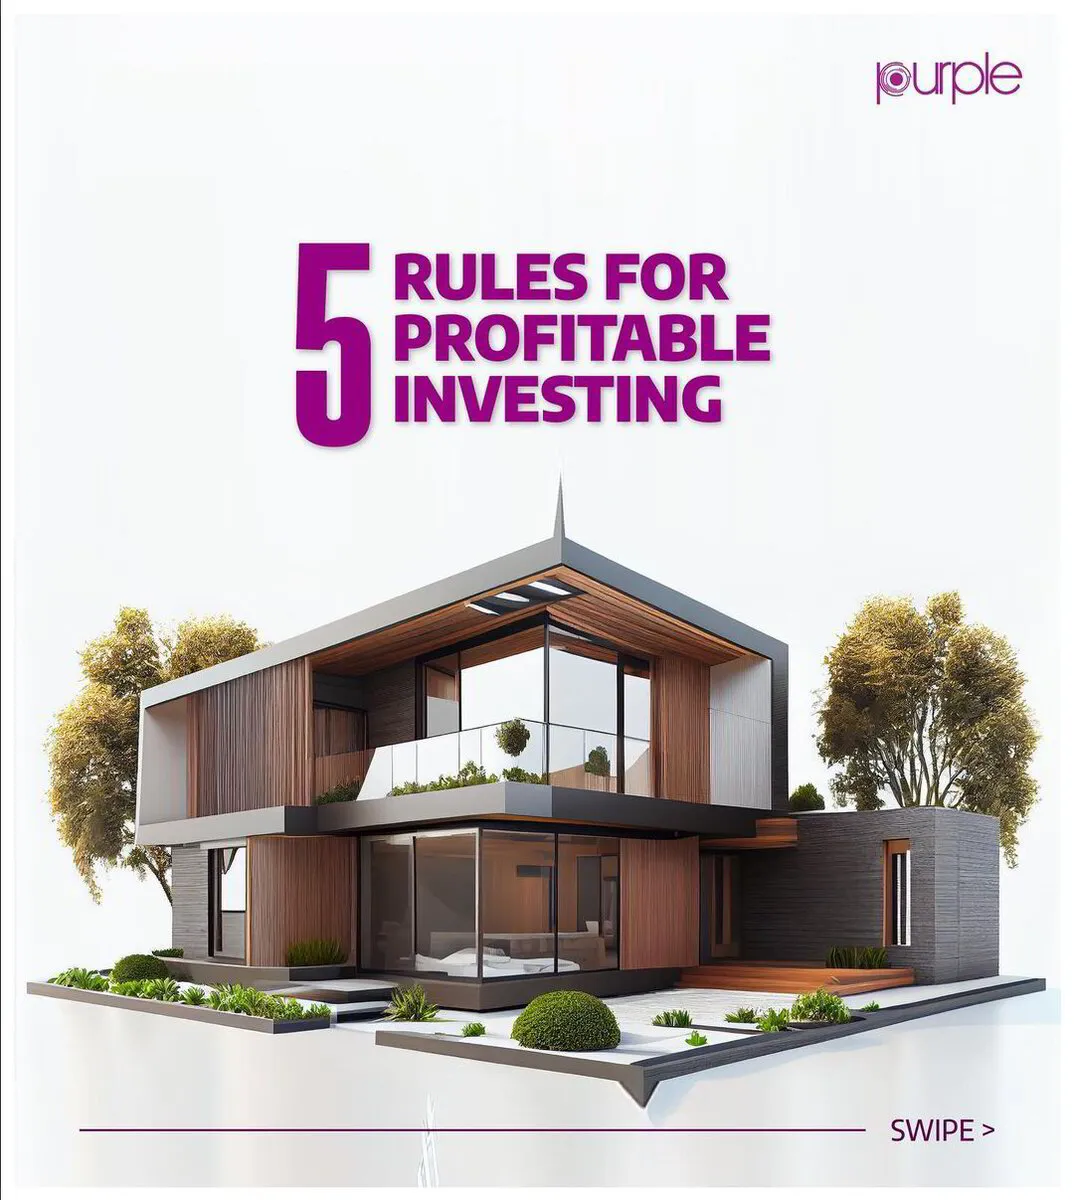 5 Rules for Profitable Real Estate Investing